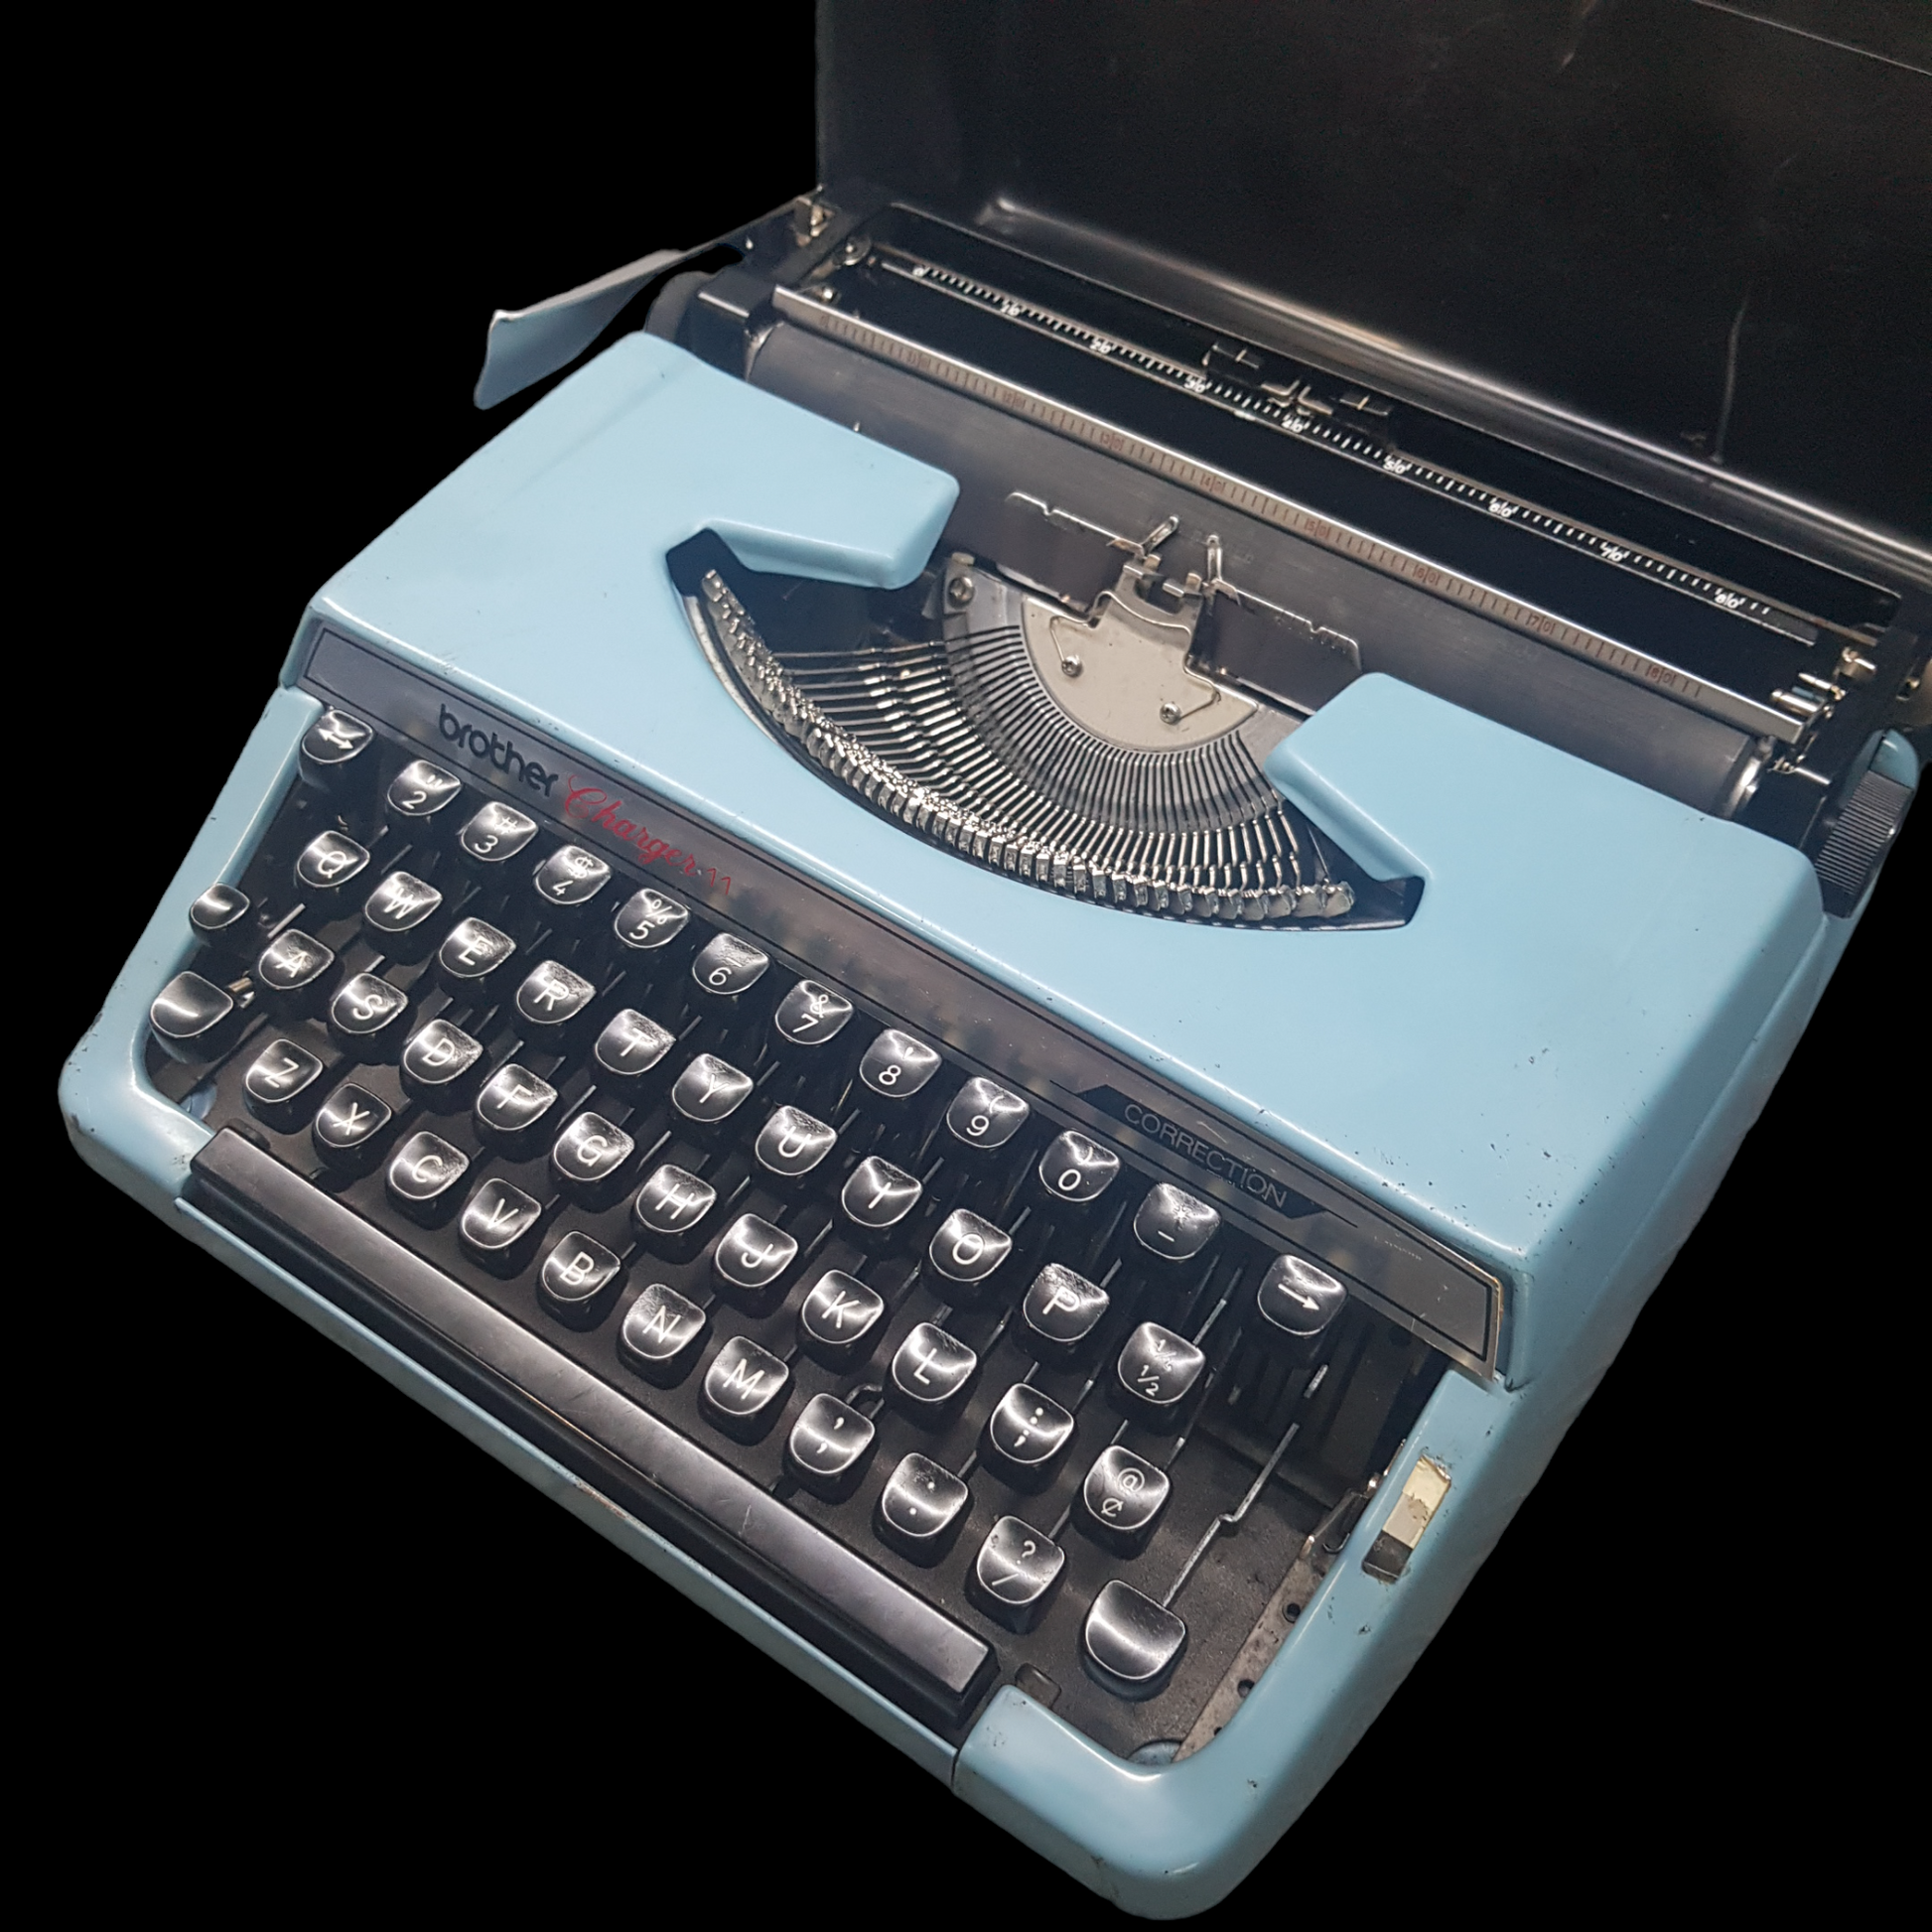 Image of Brother Charger 11 Typewriter. Portable Typewriter. Original Blue. Made in Japan. Available from universaltypewritercompany.in.